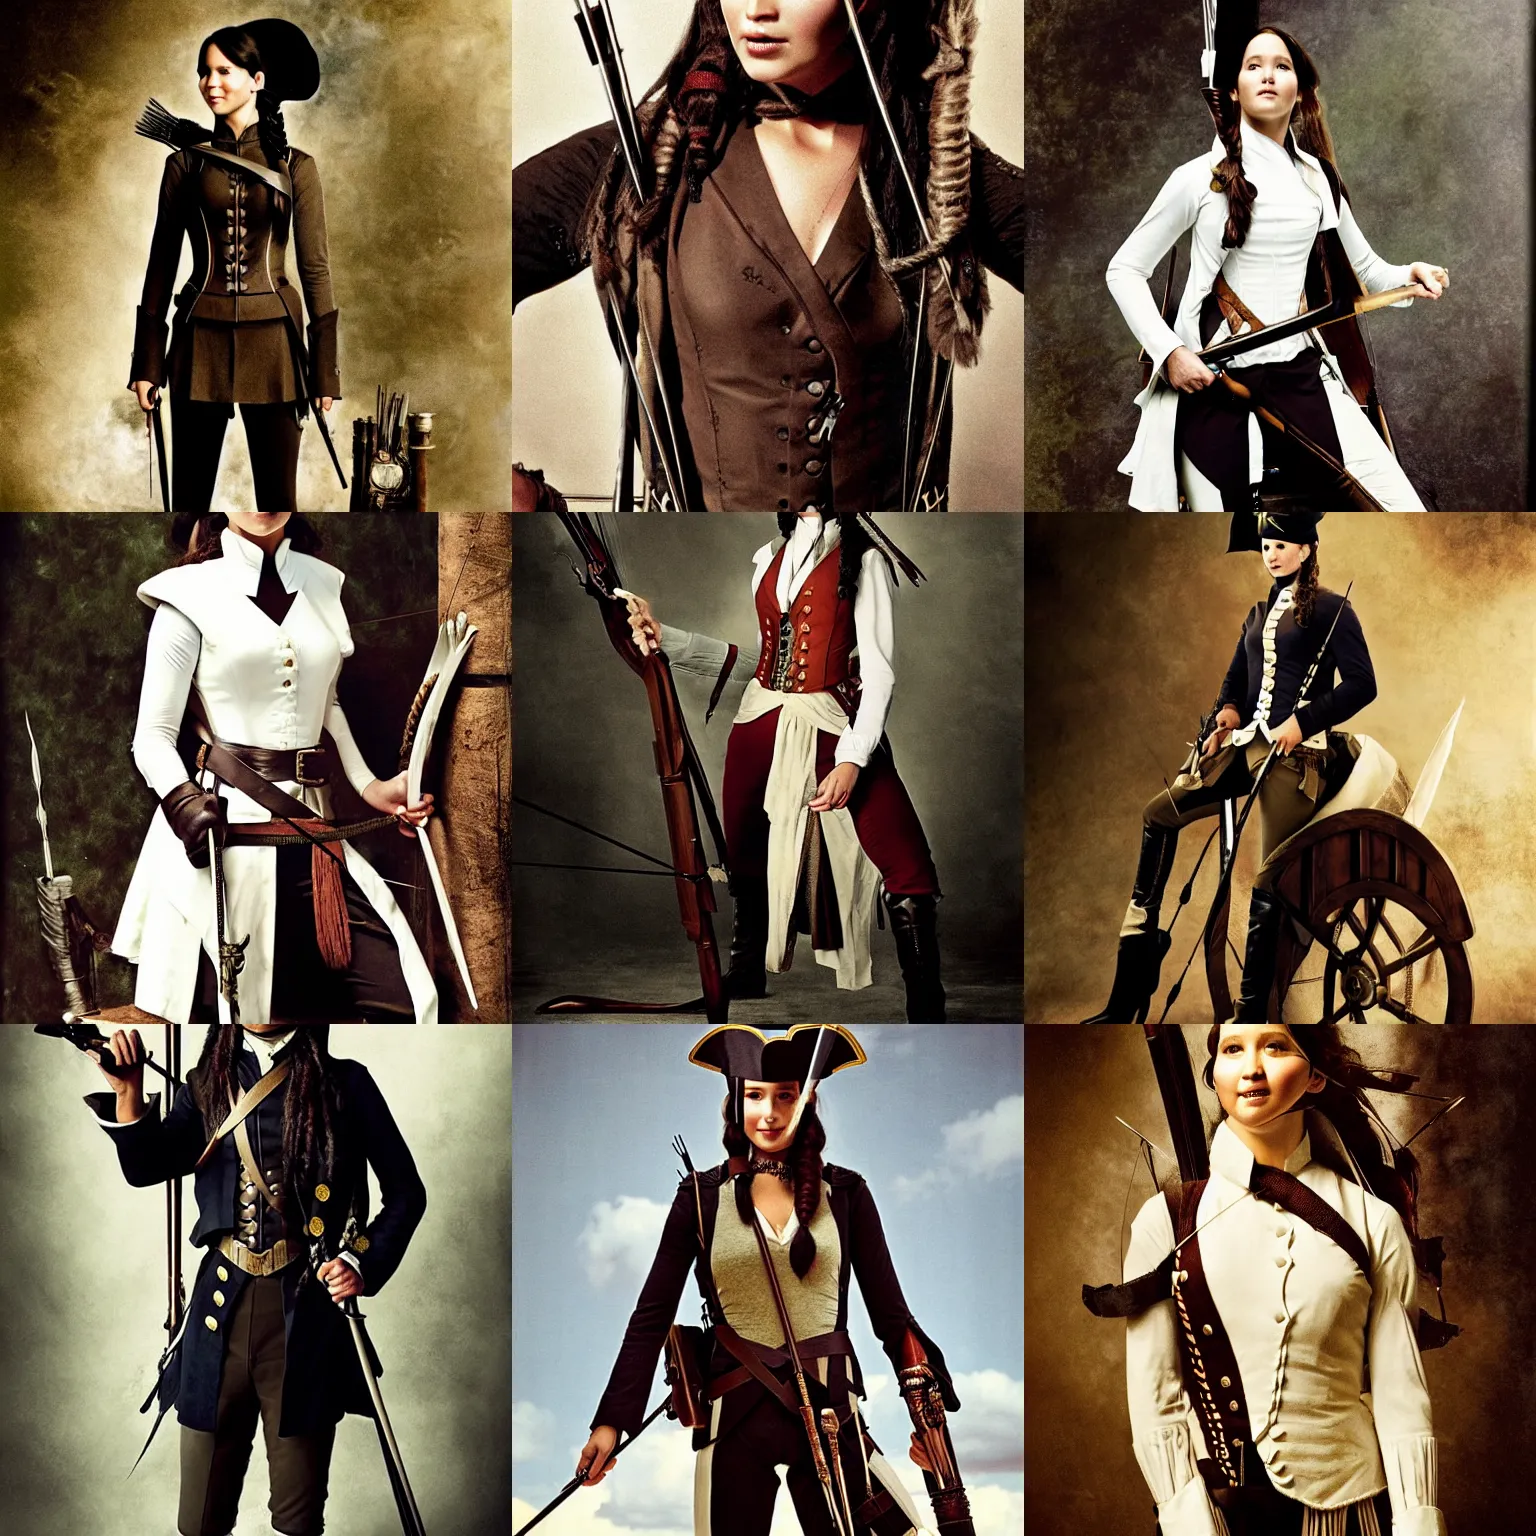 Prompt: katniss everdeen as admiral norrington from pirates of the caribbean, wearing waistcoat, breeches, stockings and a tricorn hat, photo portrait by annie leibovitz